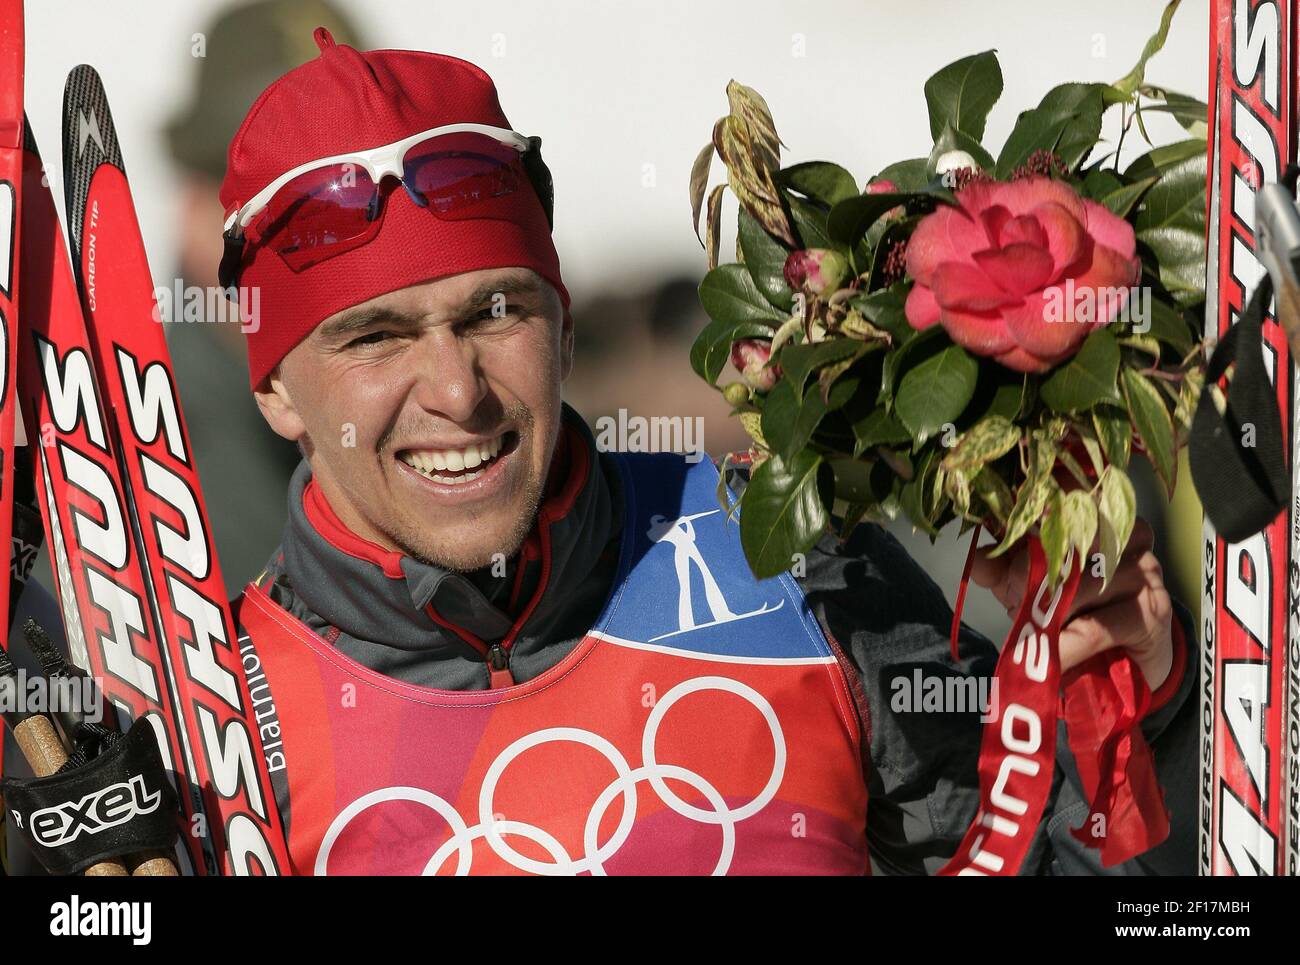 Germany's Michael Greis celebrates his gold medal for the men's 20 km individual biathlon competition at the 2006 Winter Olympic Games in Turin, Italy Saturday February 11, 2006. Greis finished with a time of 53:23:0. (Photo by Abaca Press/KRT) Stock Photo